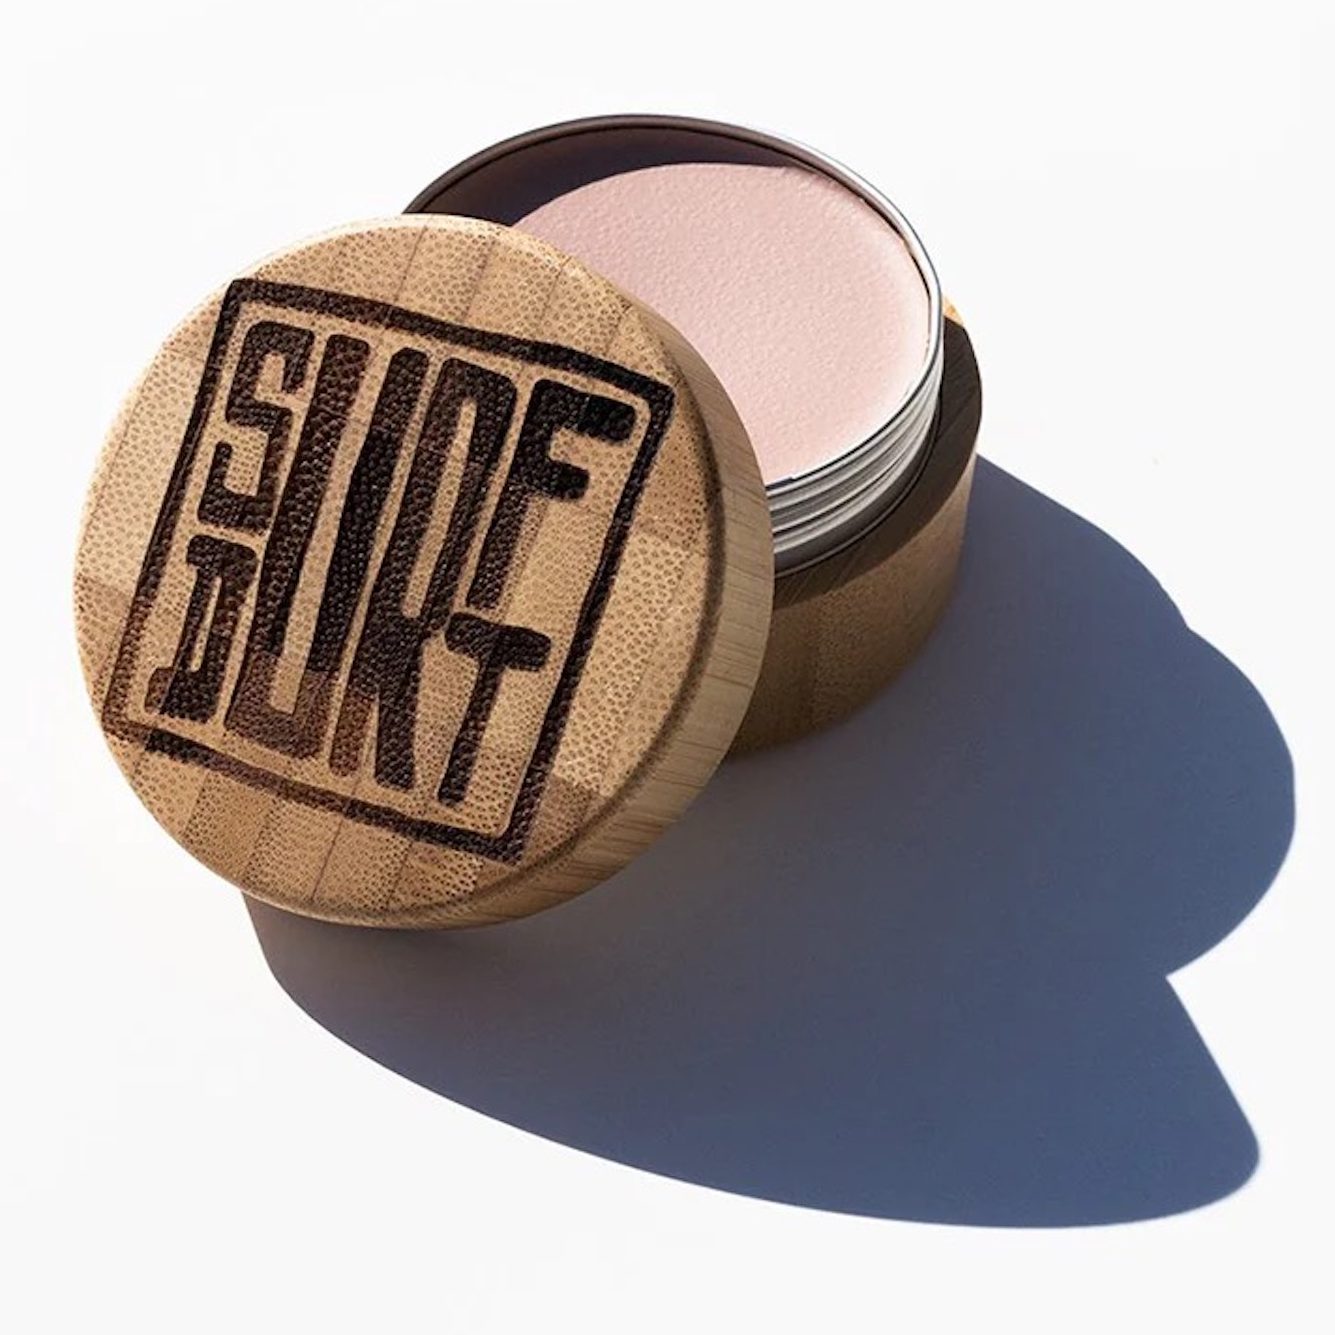 San Diego magazine holiday gift guide item The OG sunscreen from SurfDurt